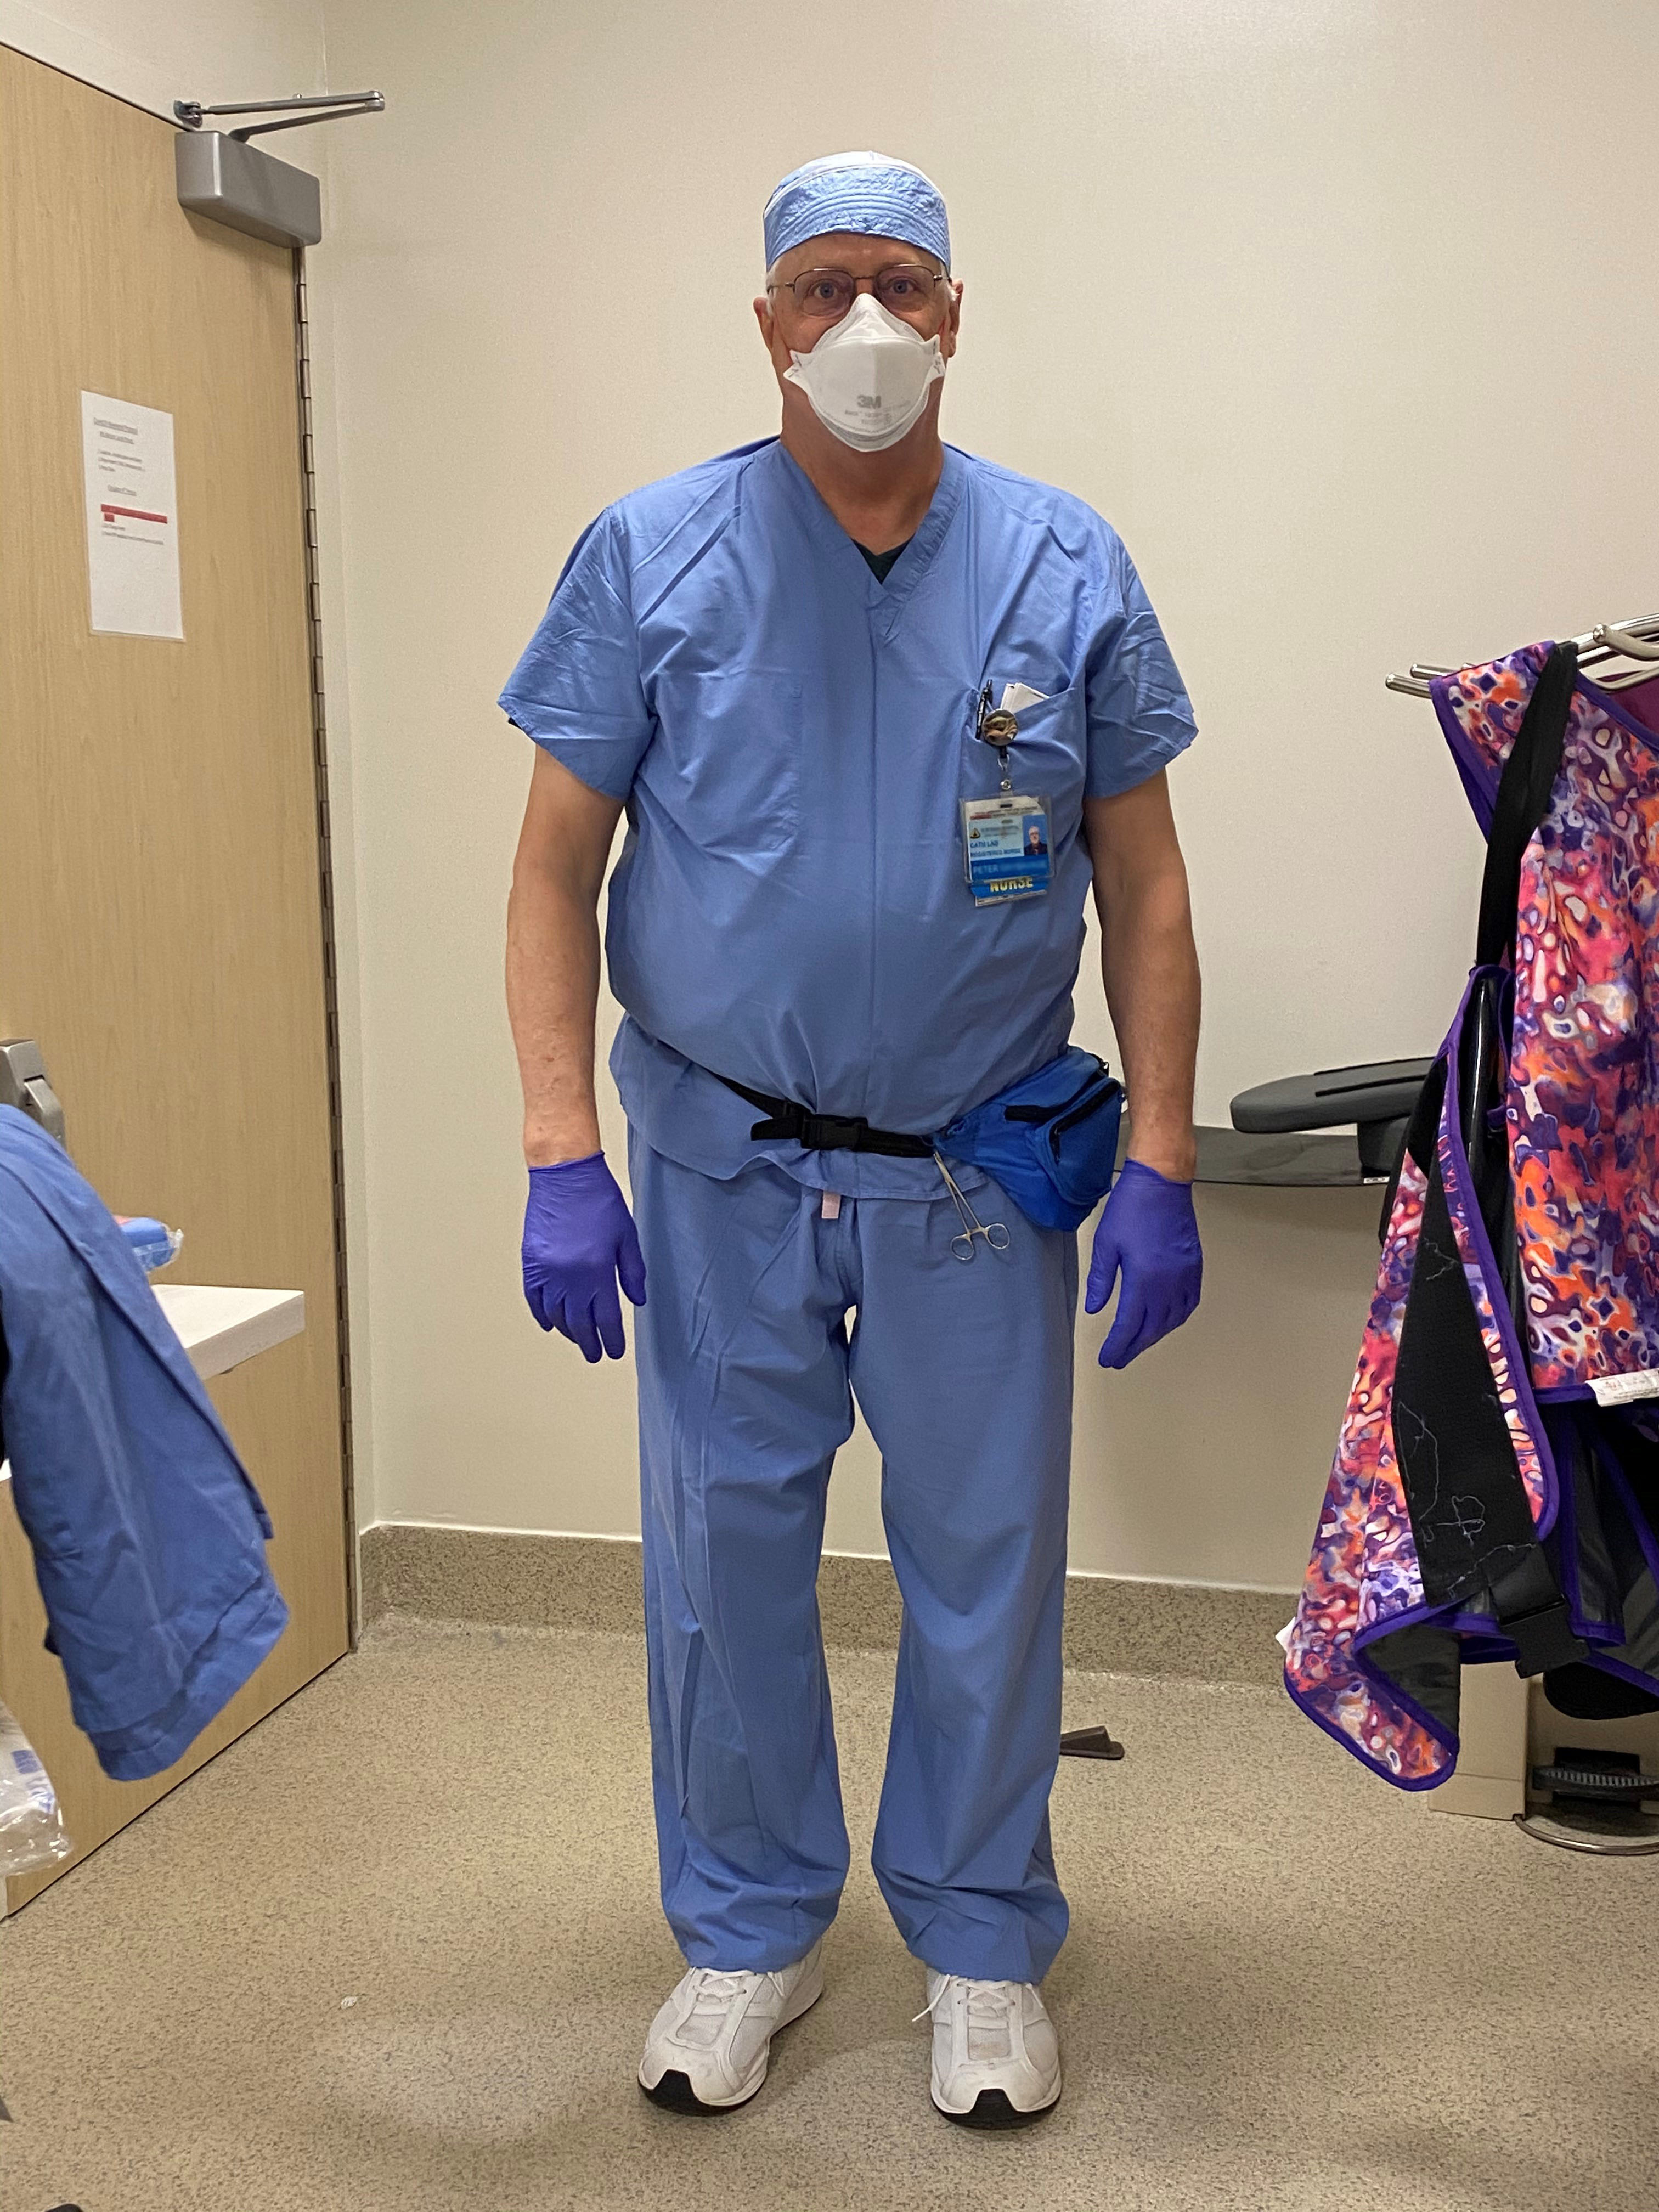 Peter From Demascus, MD in his Nurse Scrubs